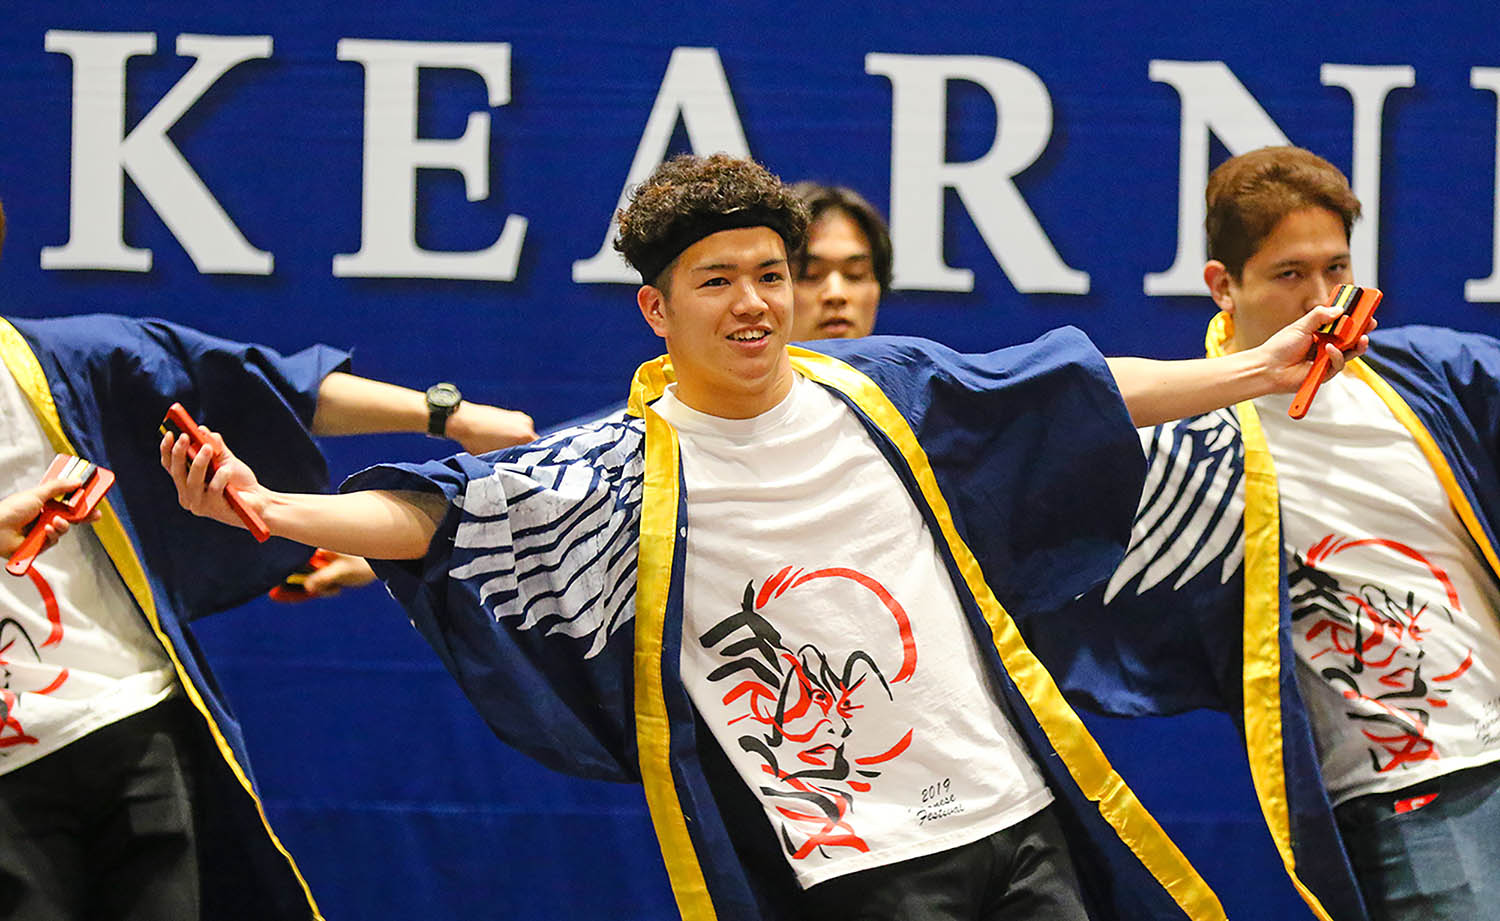 Japanese students perform a dance during last year’s International Food and Cultural Festival at UNK. The Japanese Association at Kearney will host its annual Japanese Festival on Saturday in the Ponderosa Room at UNK’s Nebraskan Student Union. (Photo by Todd Gottula, UNK Communications)